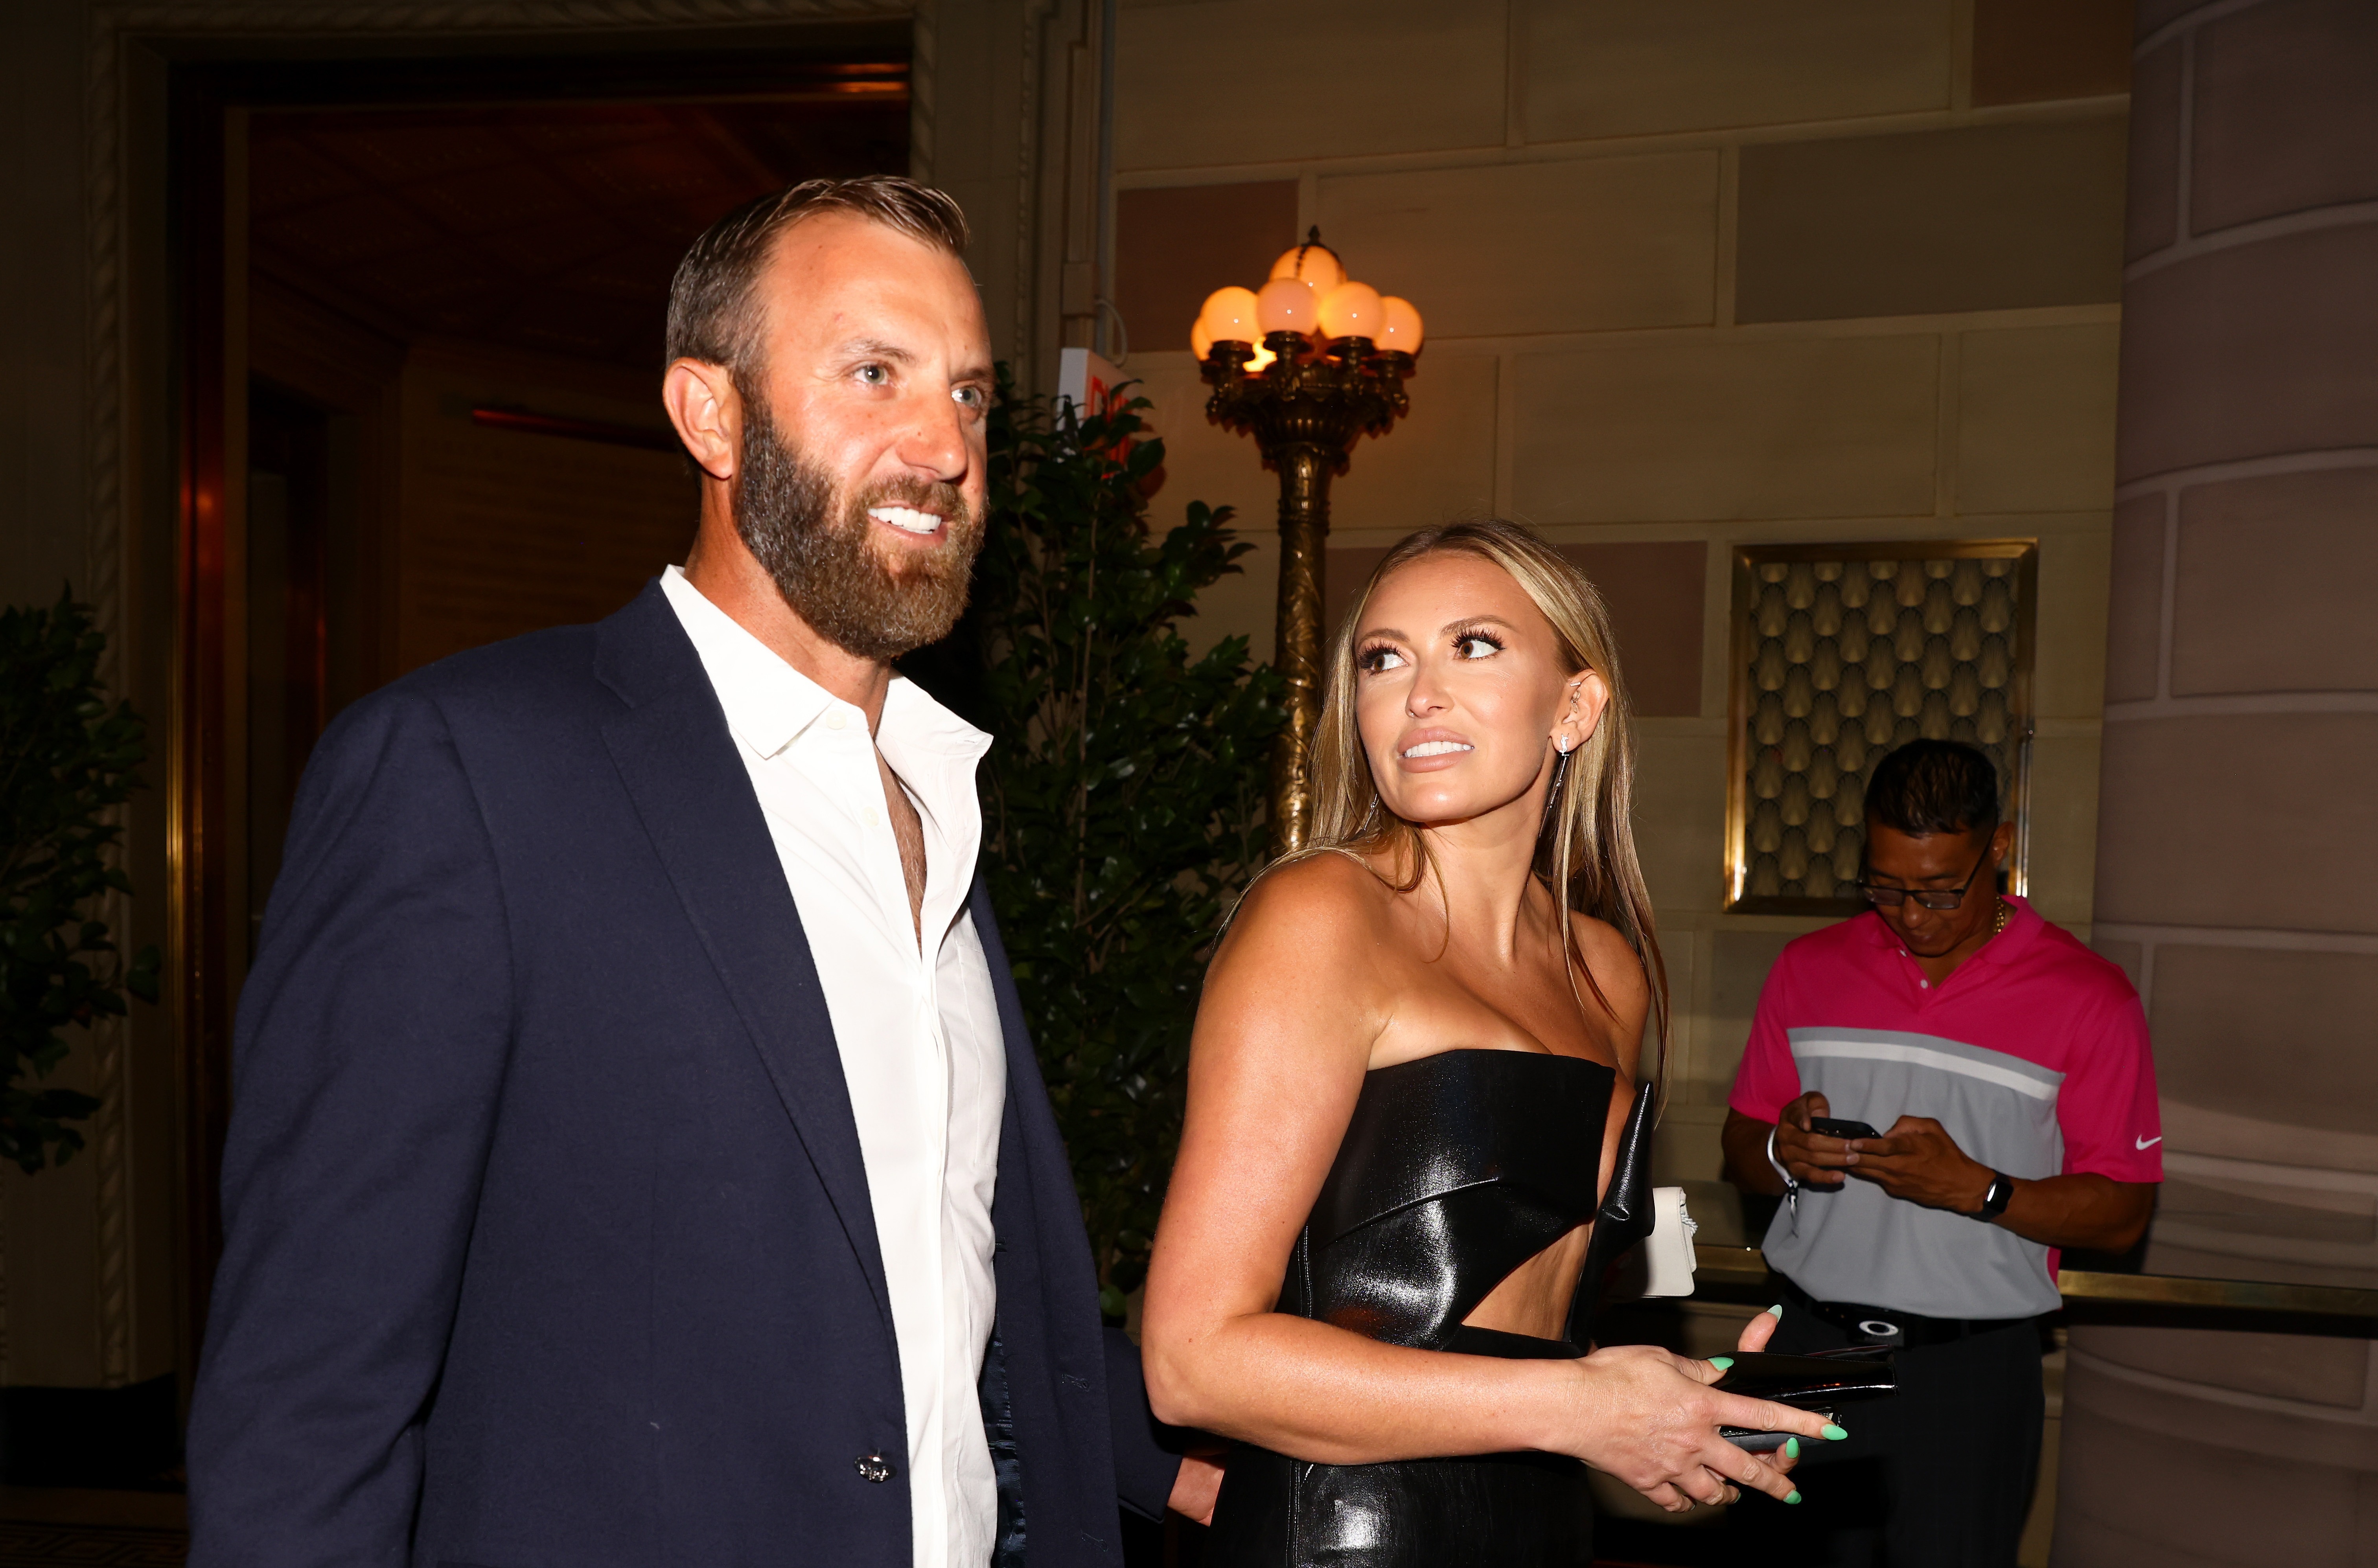 , Paulina Gretzky stuns in see-through dress as Dustin Johnson’s wife brings in the New Year in style